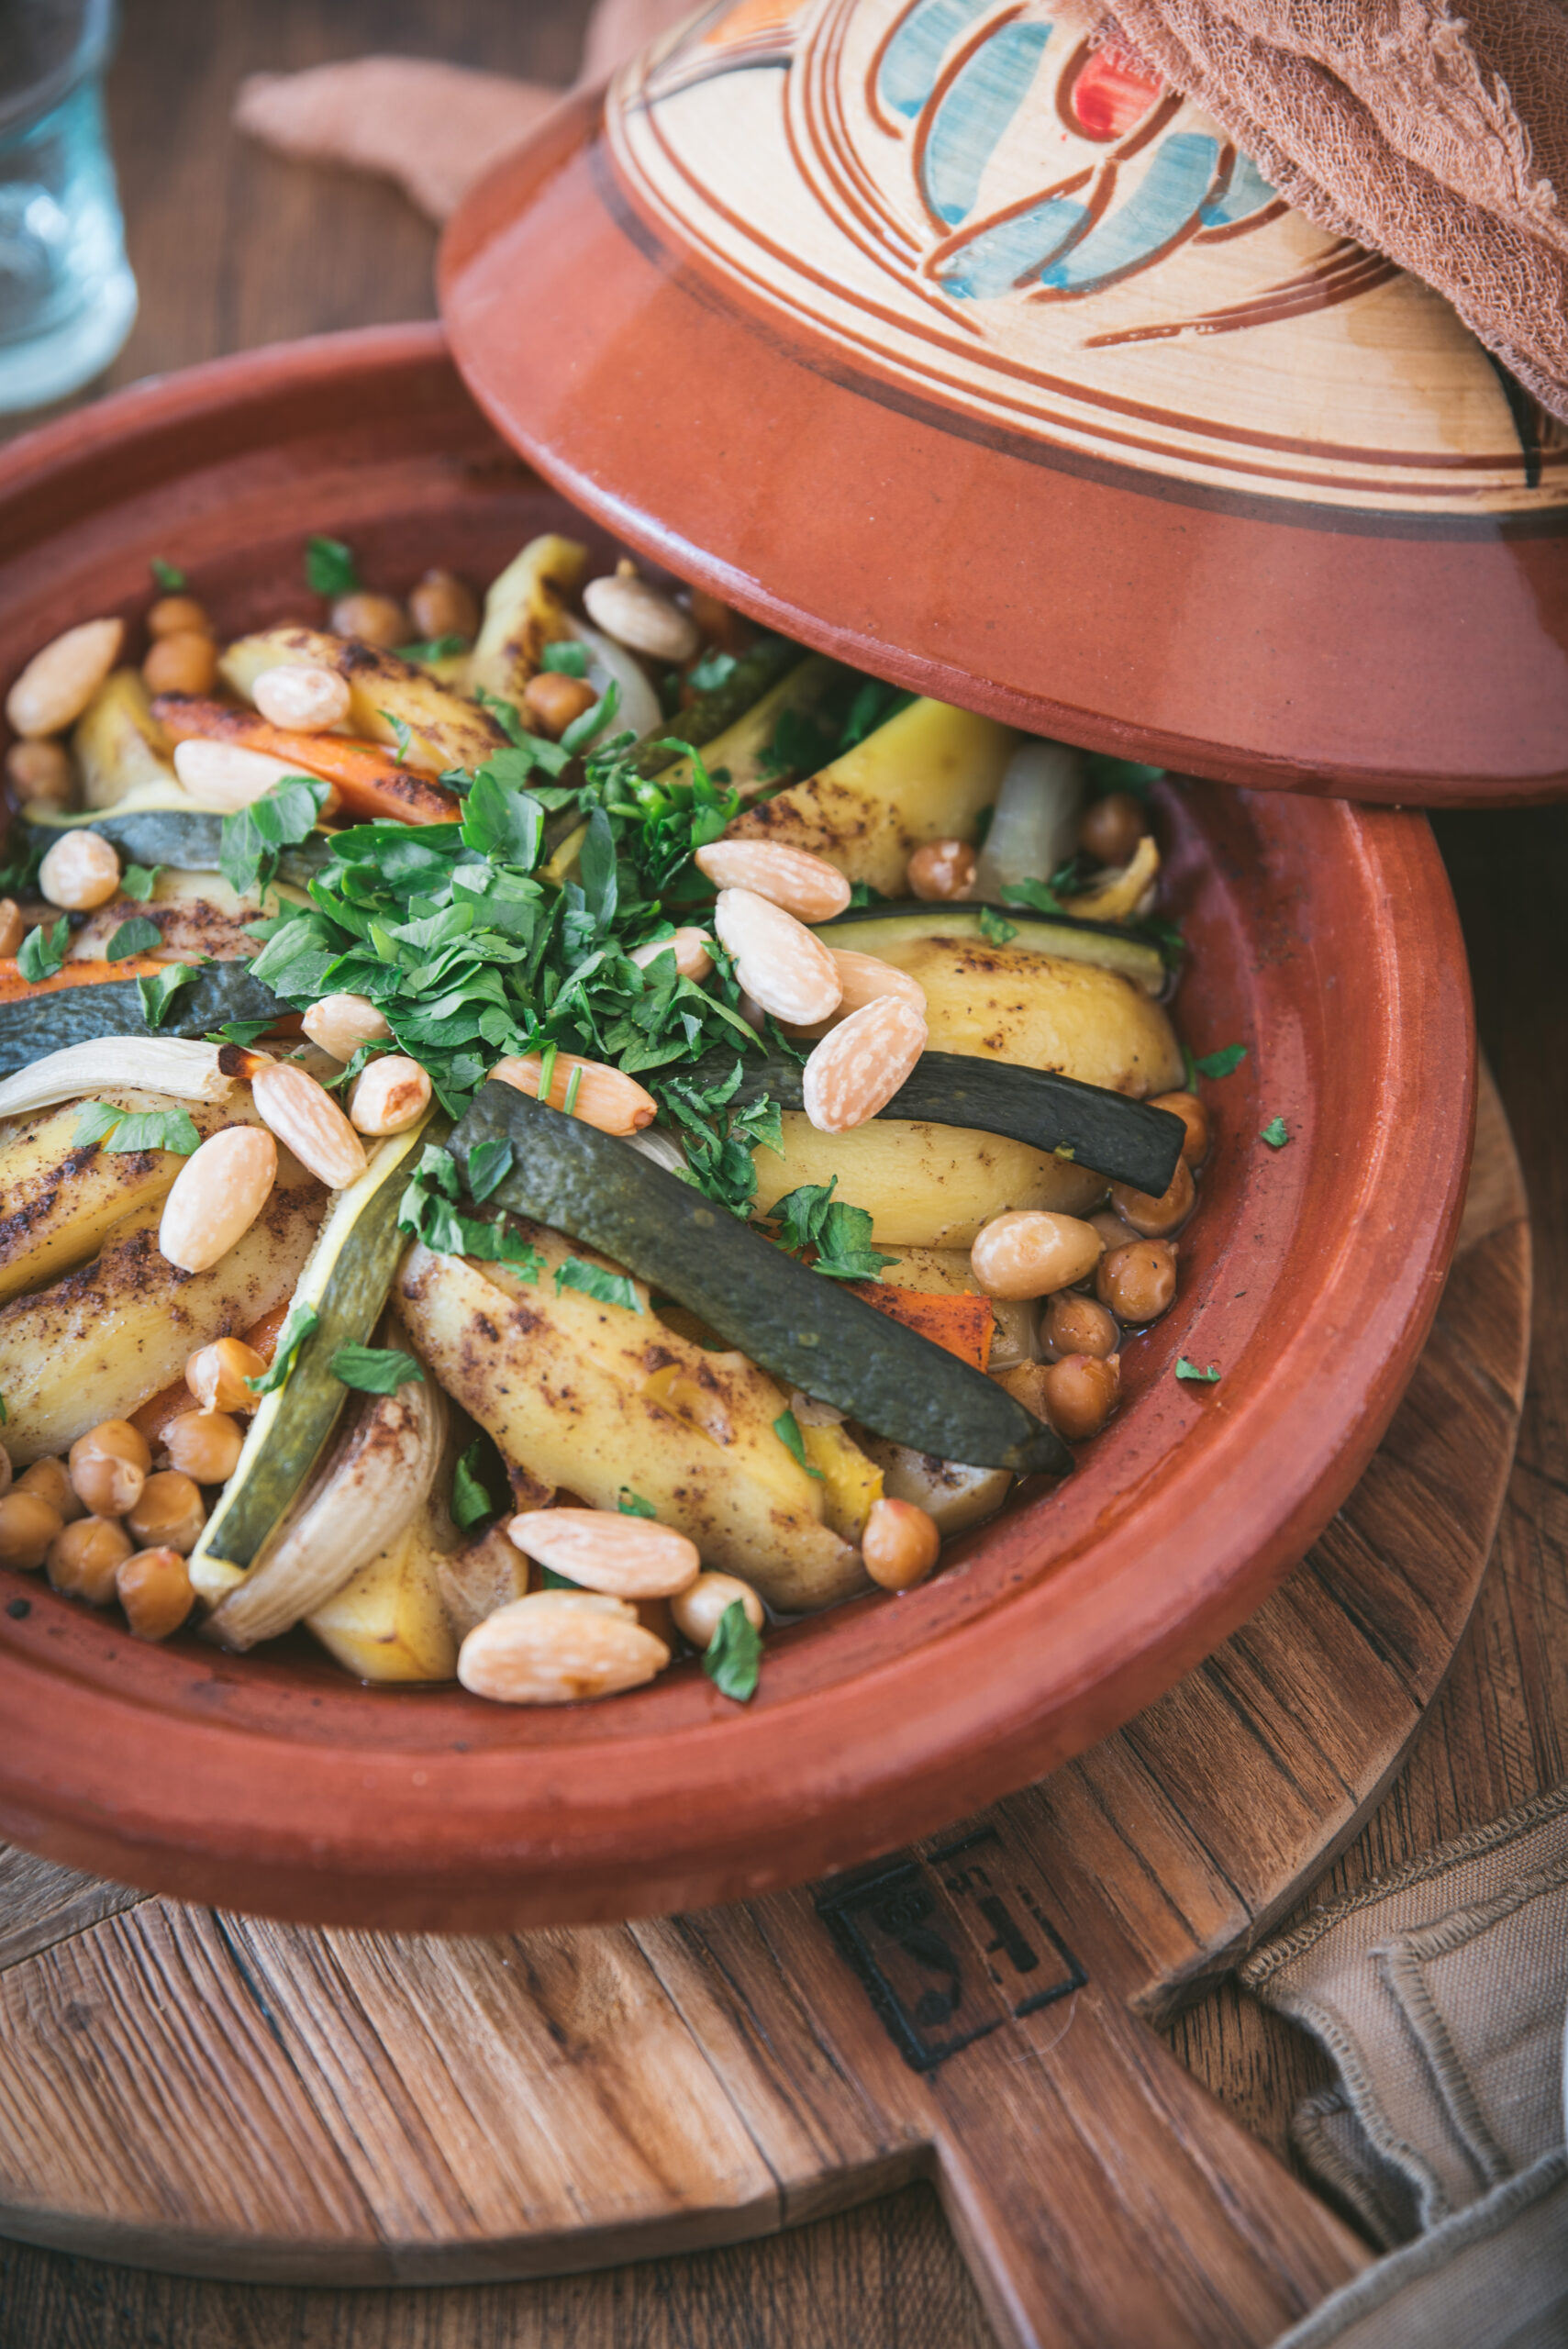 Vegetarian Tagine Recipe with Vegetables